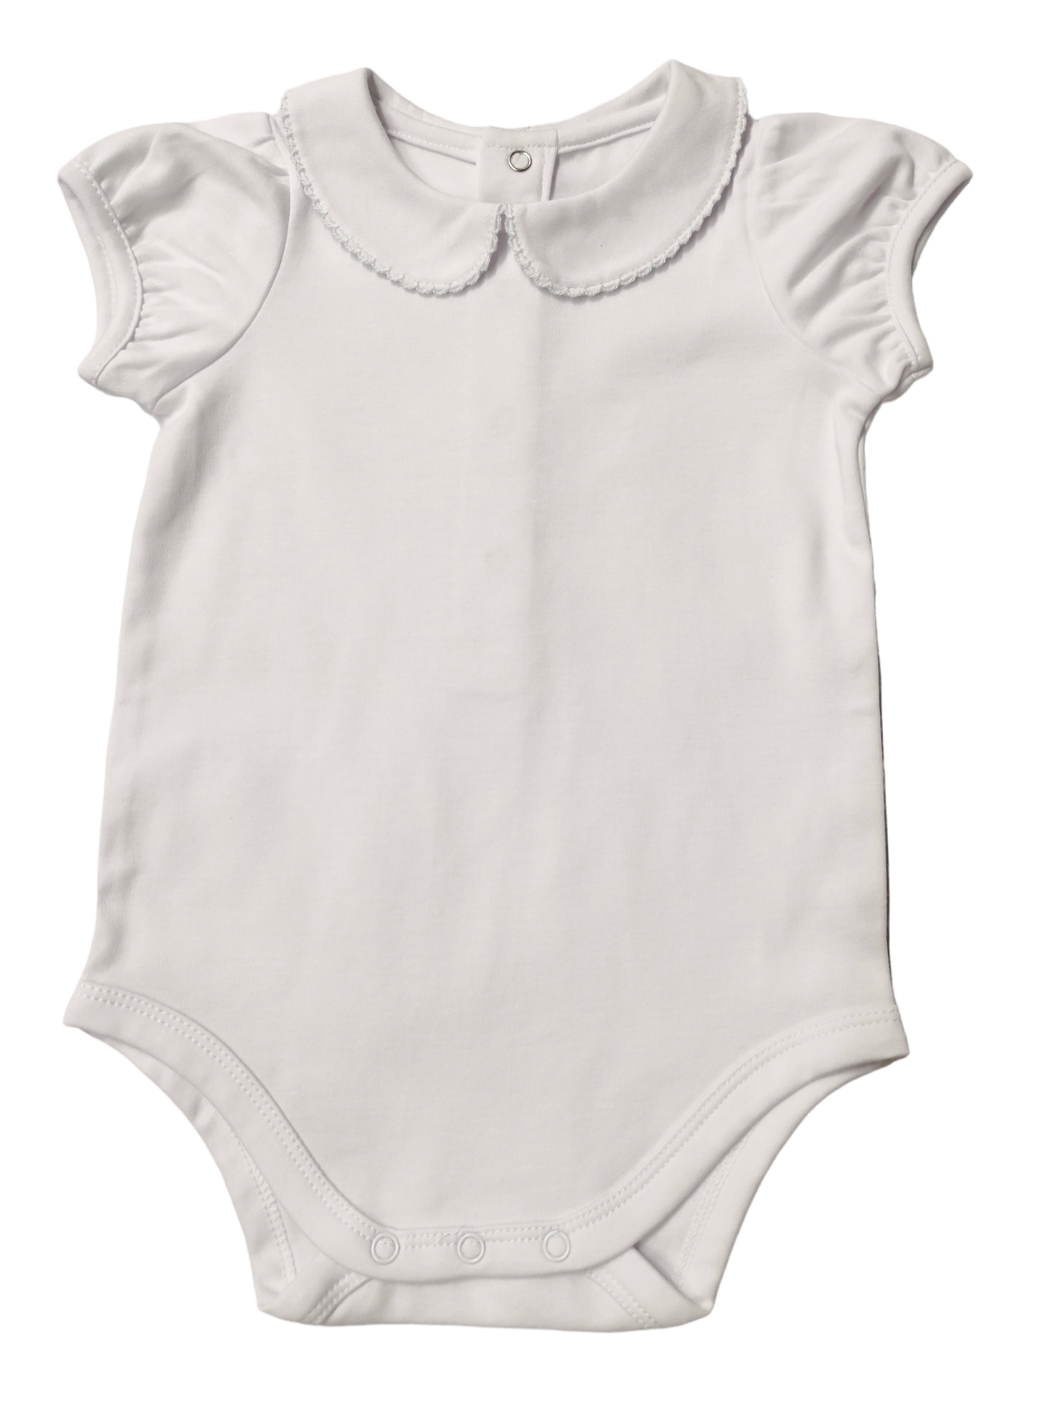 The Collared Bodysuit ~ Puff Sleeve w/ White Picot Trim